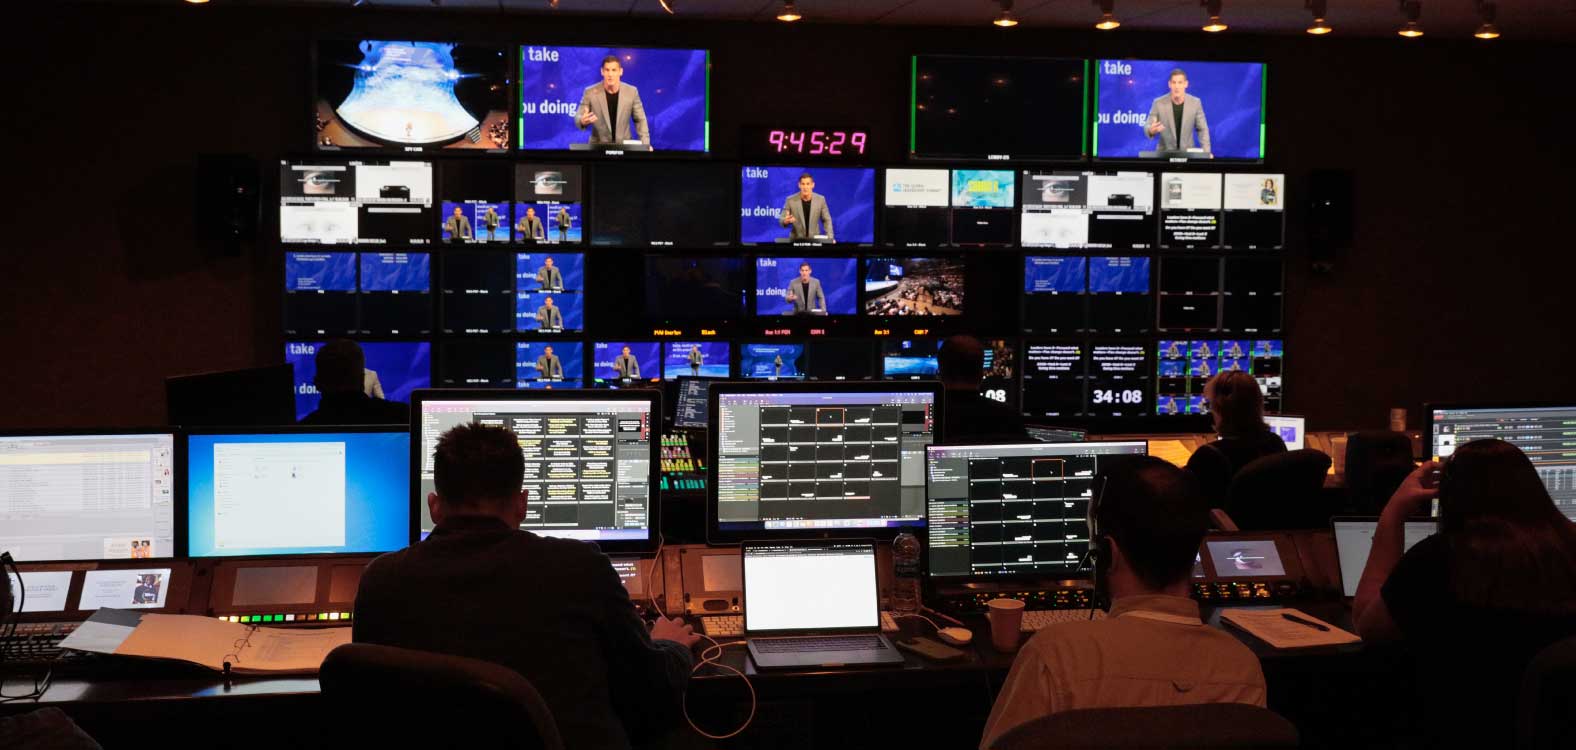 The Global Leadership Summit using Haivision live video technology to broadcast events to remote audiences.